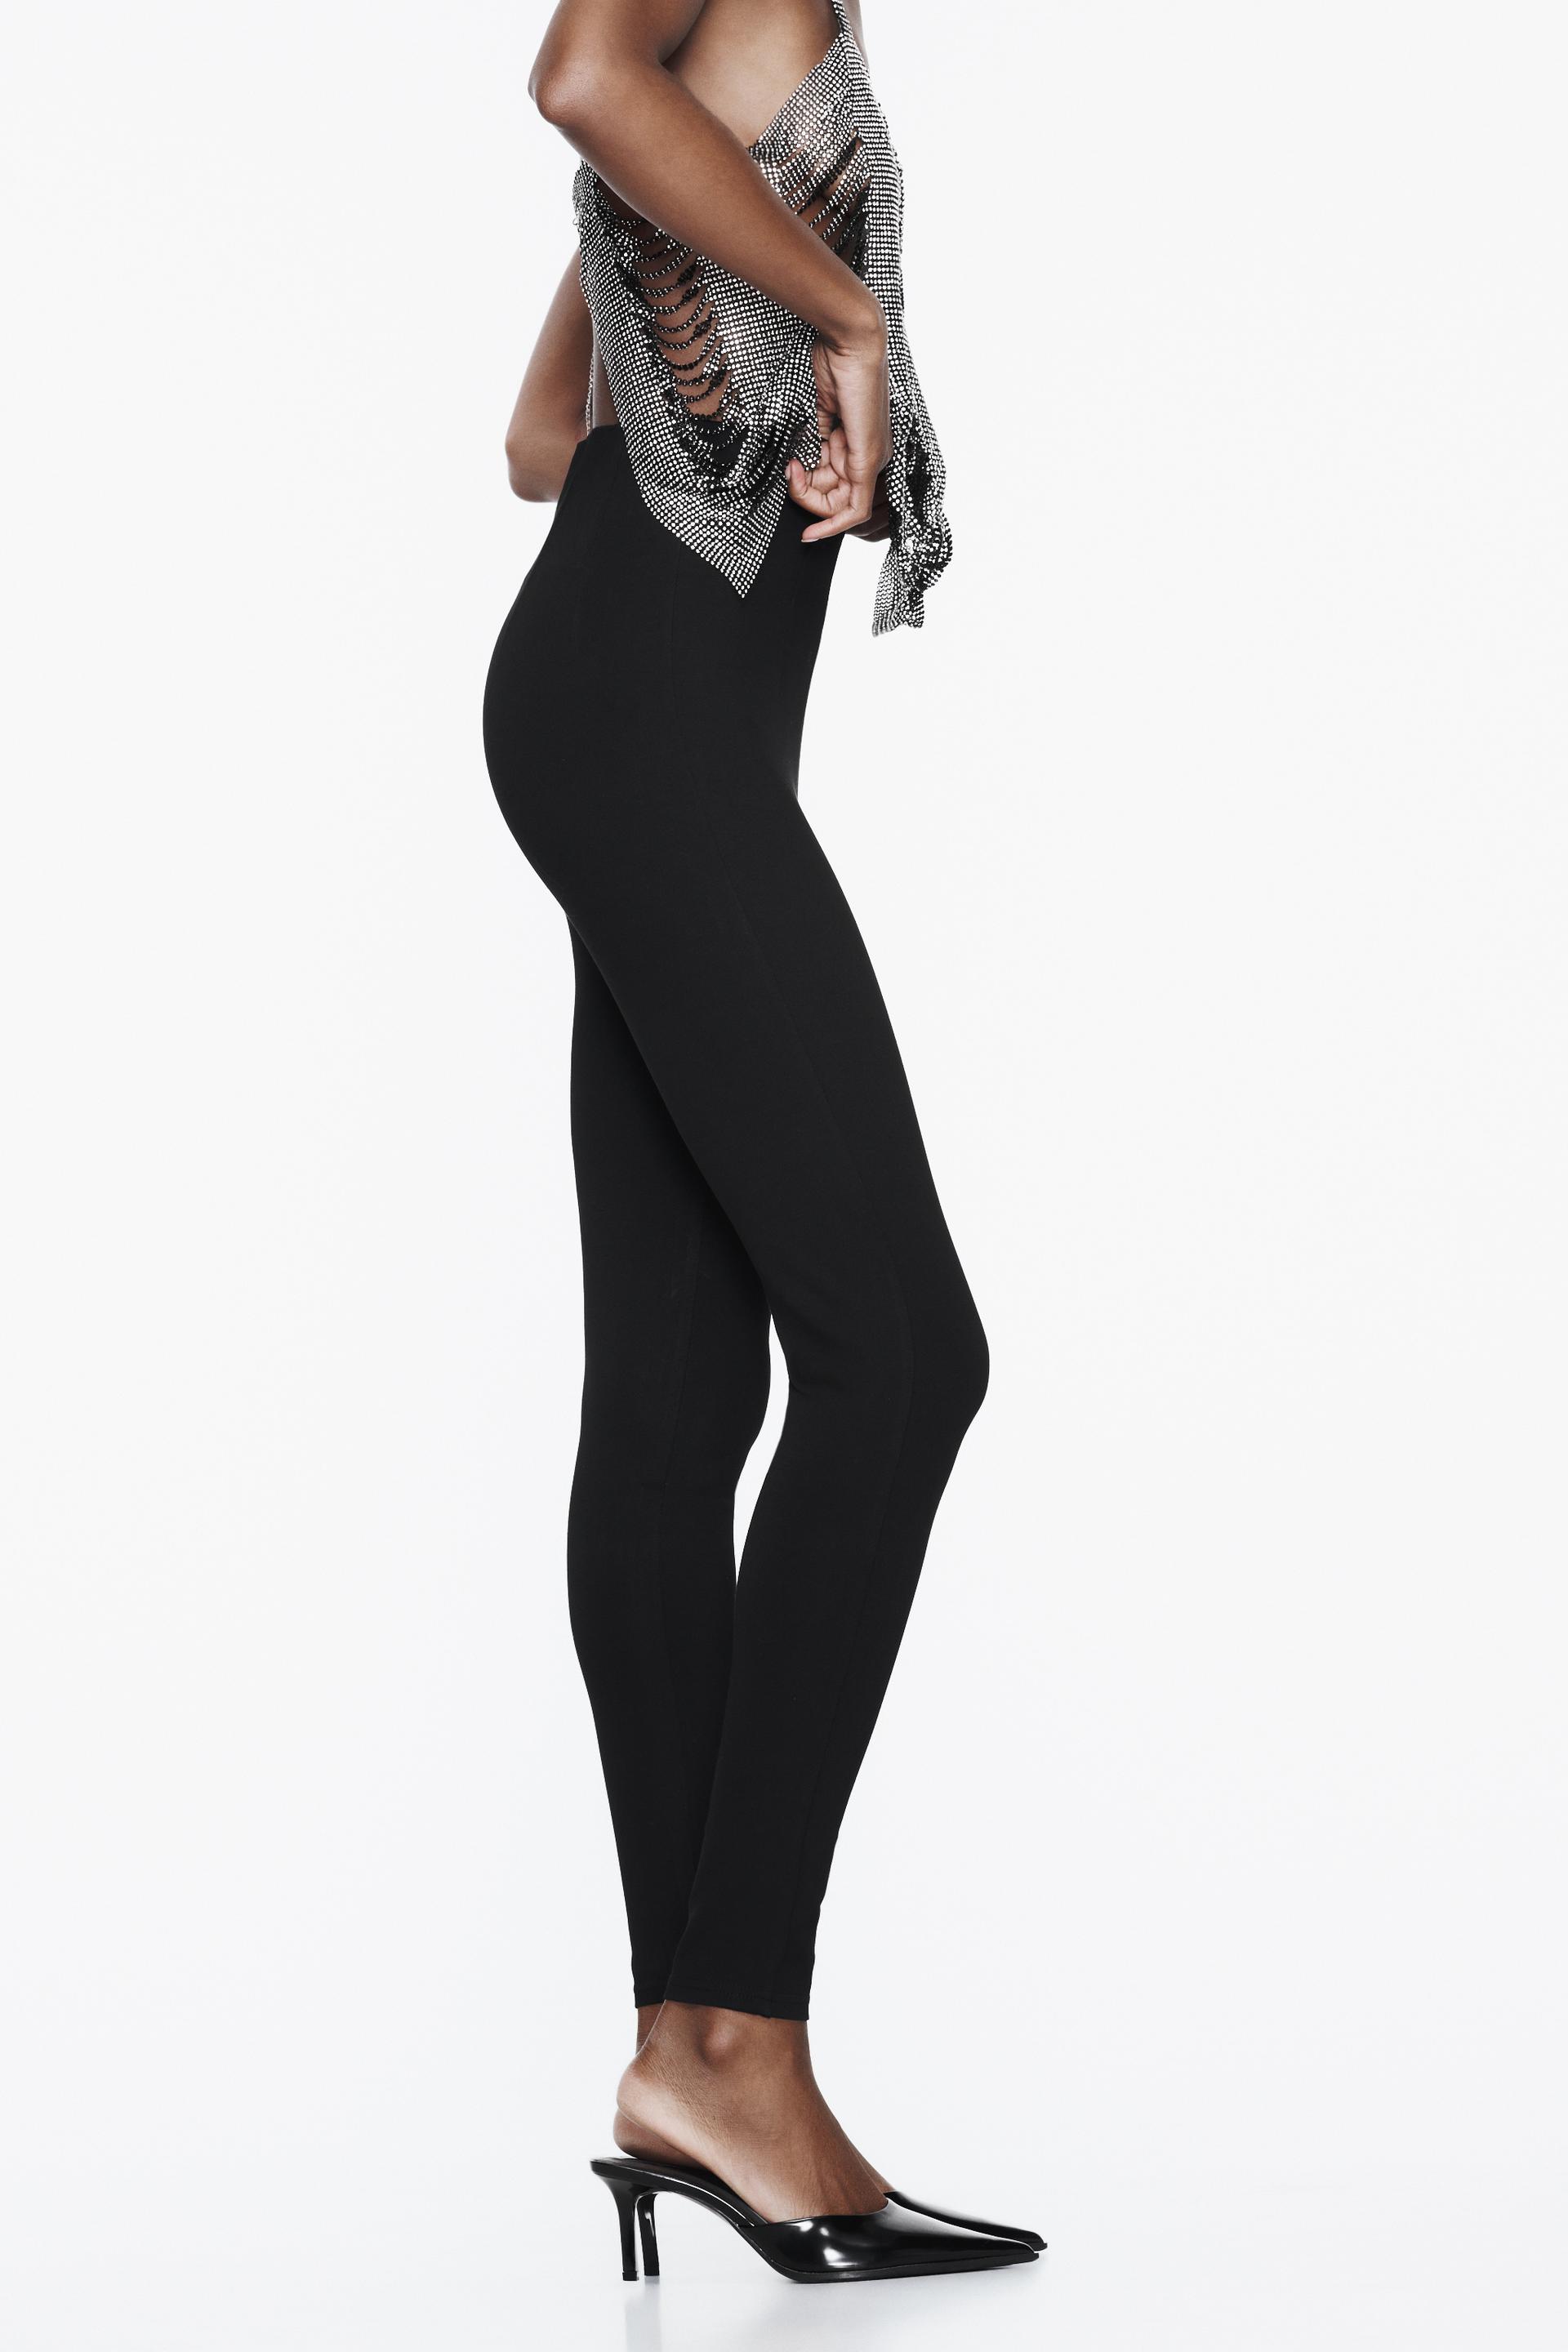 Body Shaping Yoga Leggings For Women Over 60  International Society of  Precision Agriculture